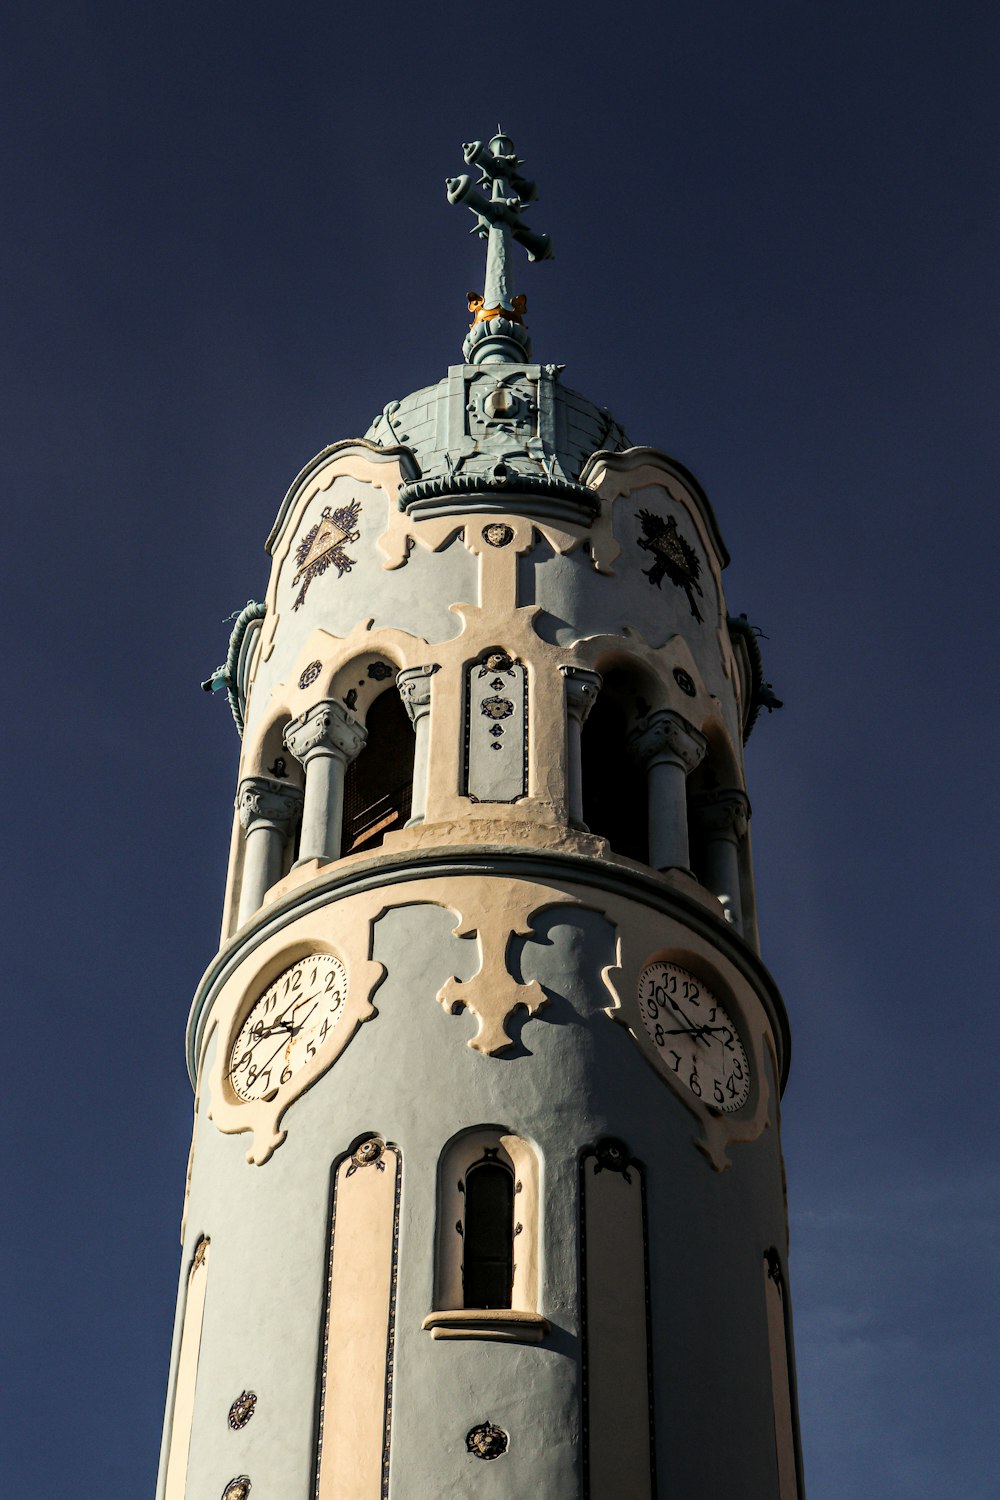 a tall tower with clocks on each of it's sides